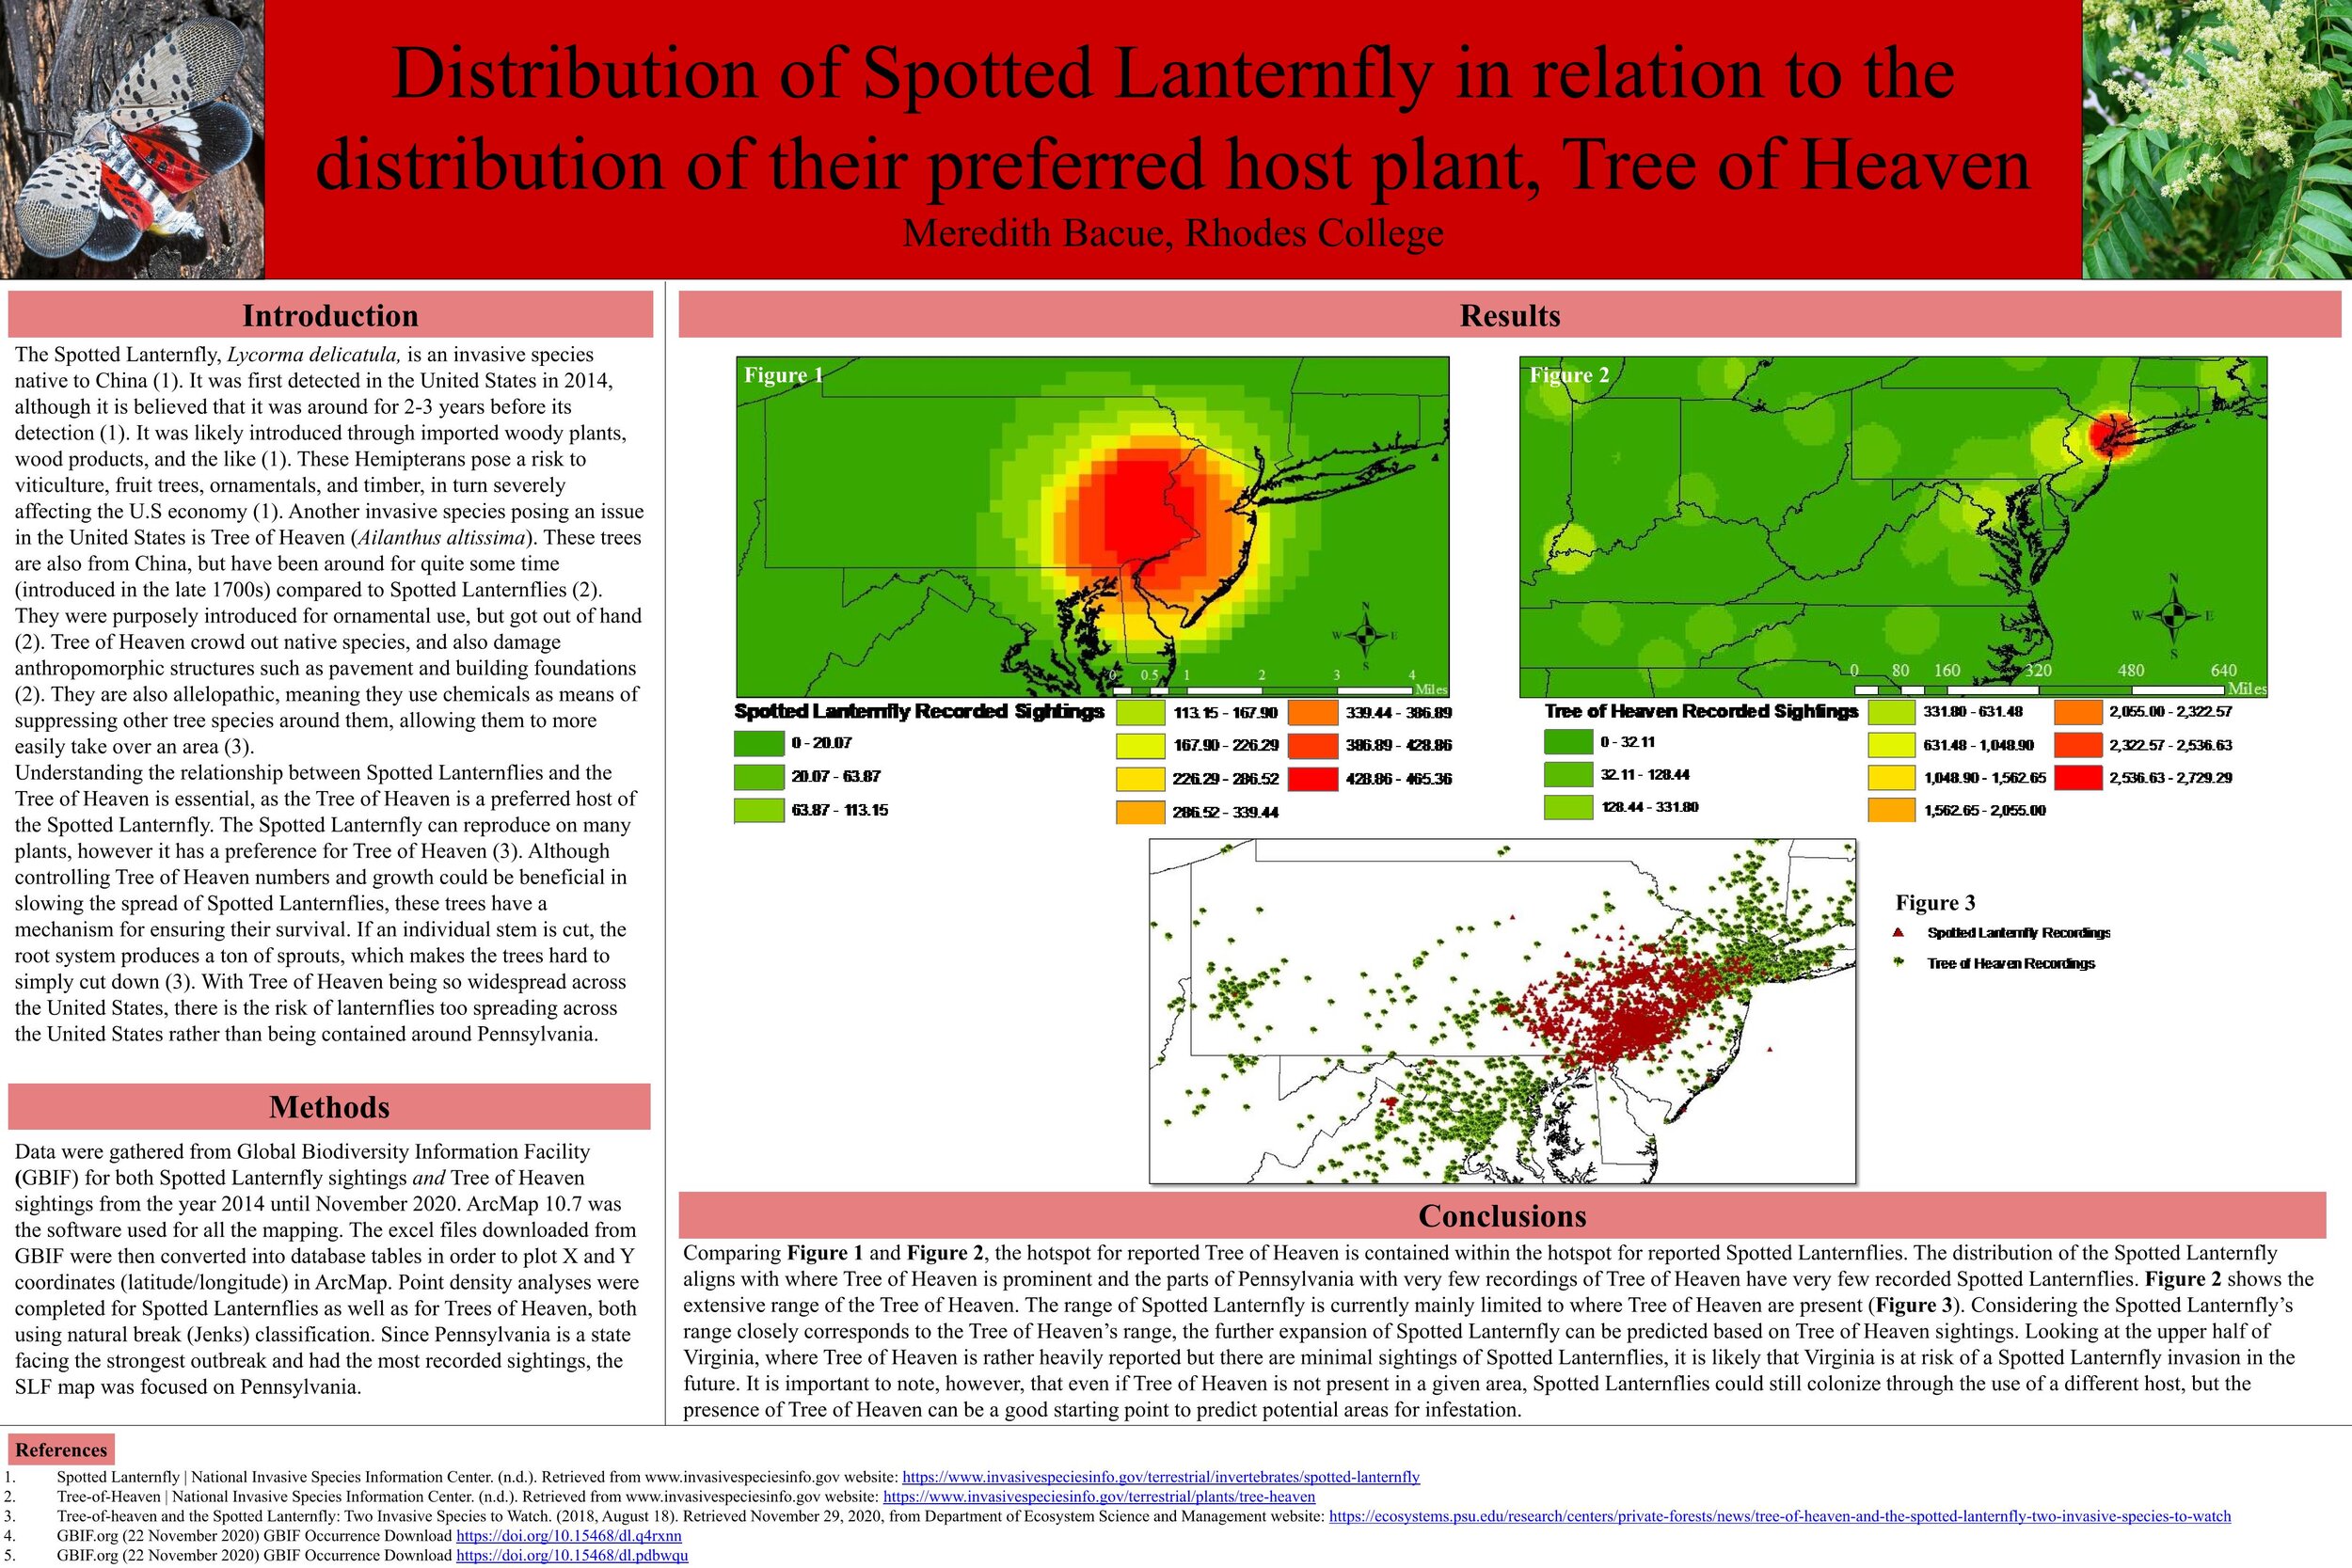 Distribution of Spotted Lanternfly in relation to the distribution of their preferred host plant, Tree of Heaven